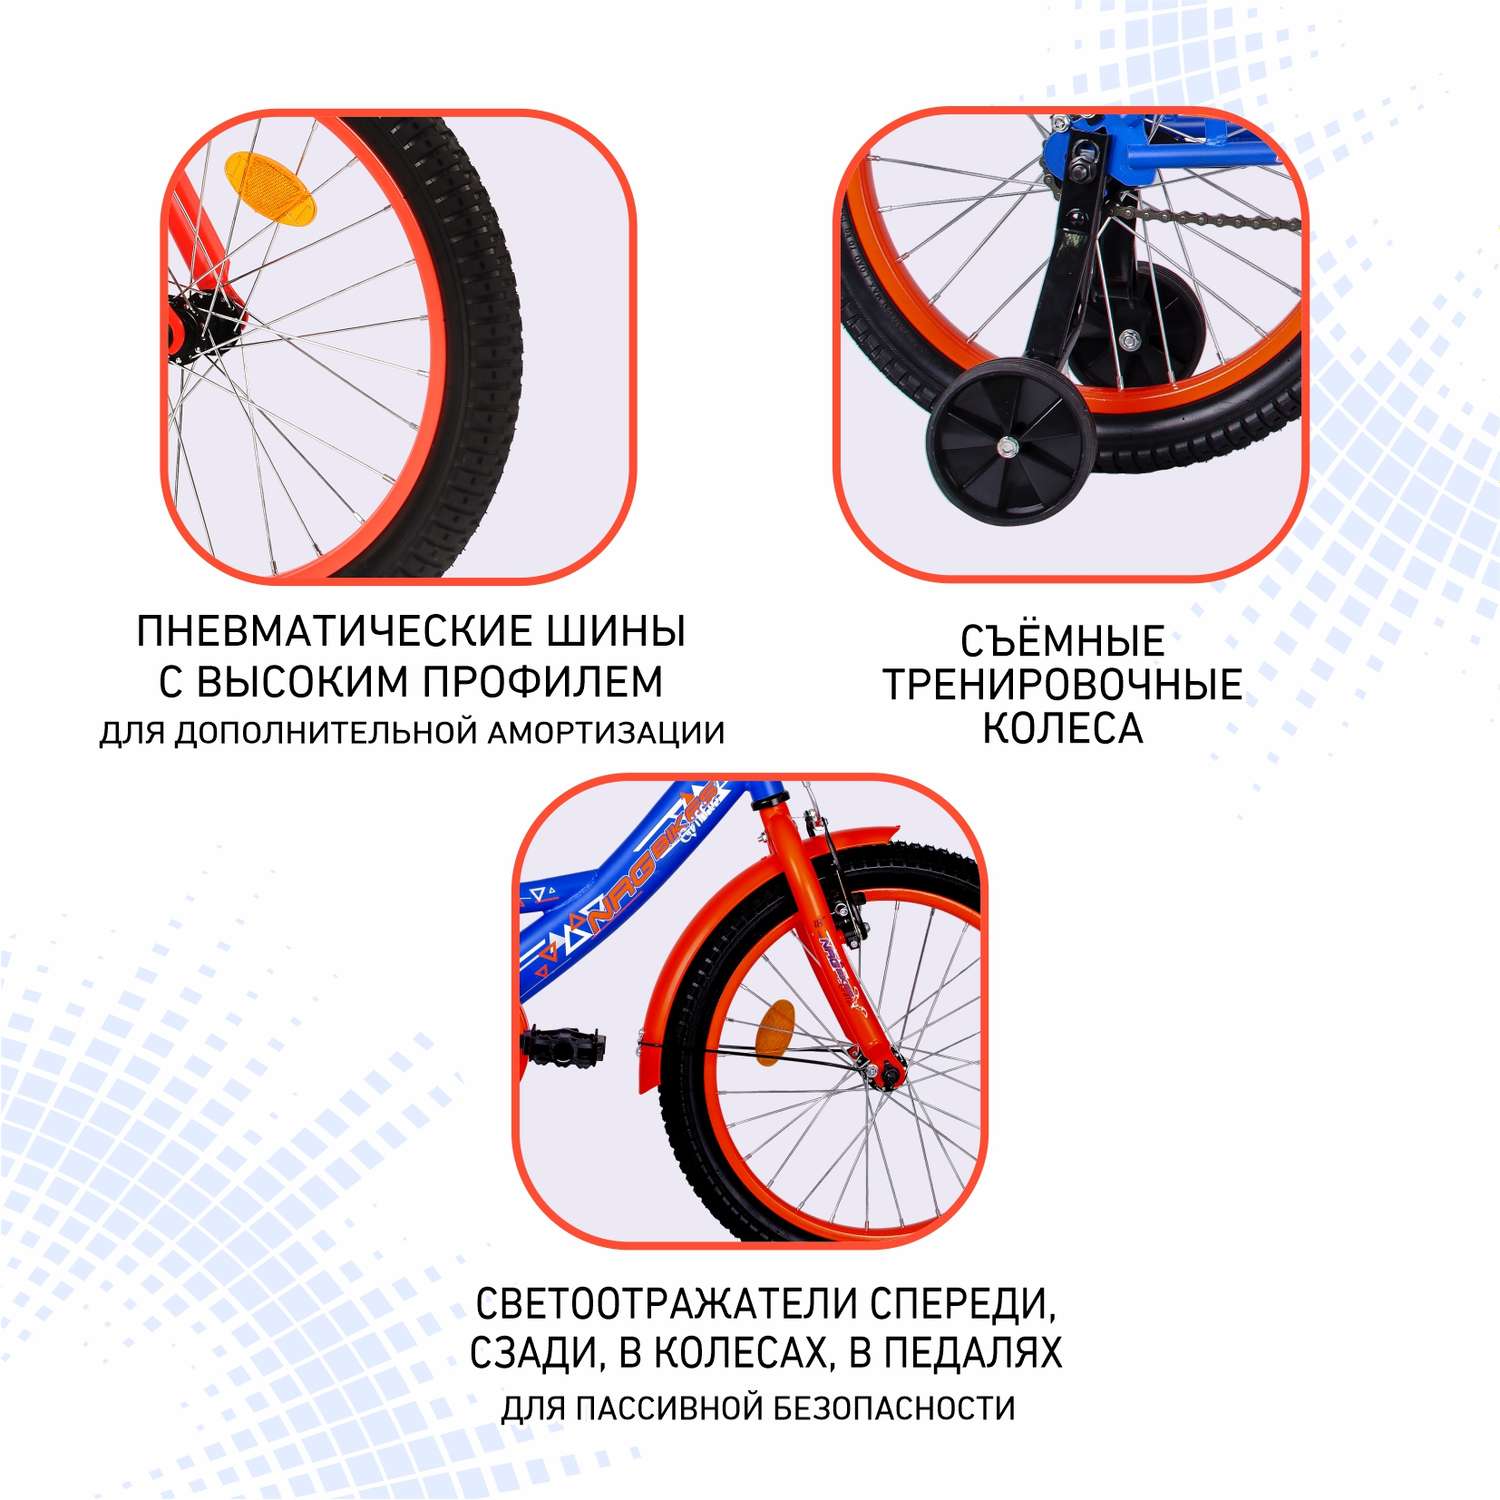 Велосипед NRG BIKES GRIFFIN 18 blue-red - фото 5